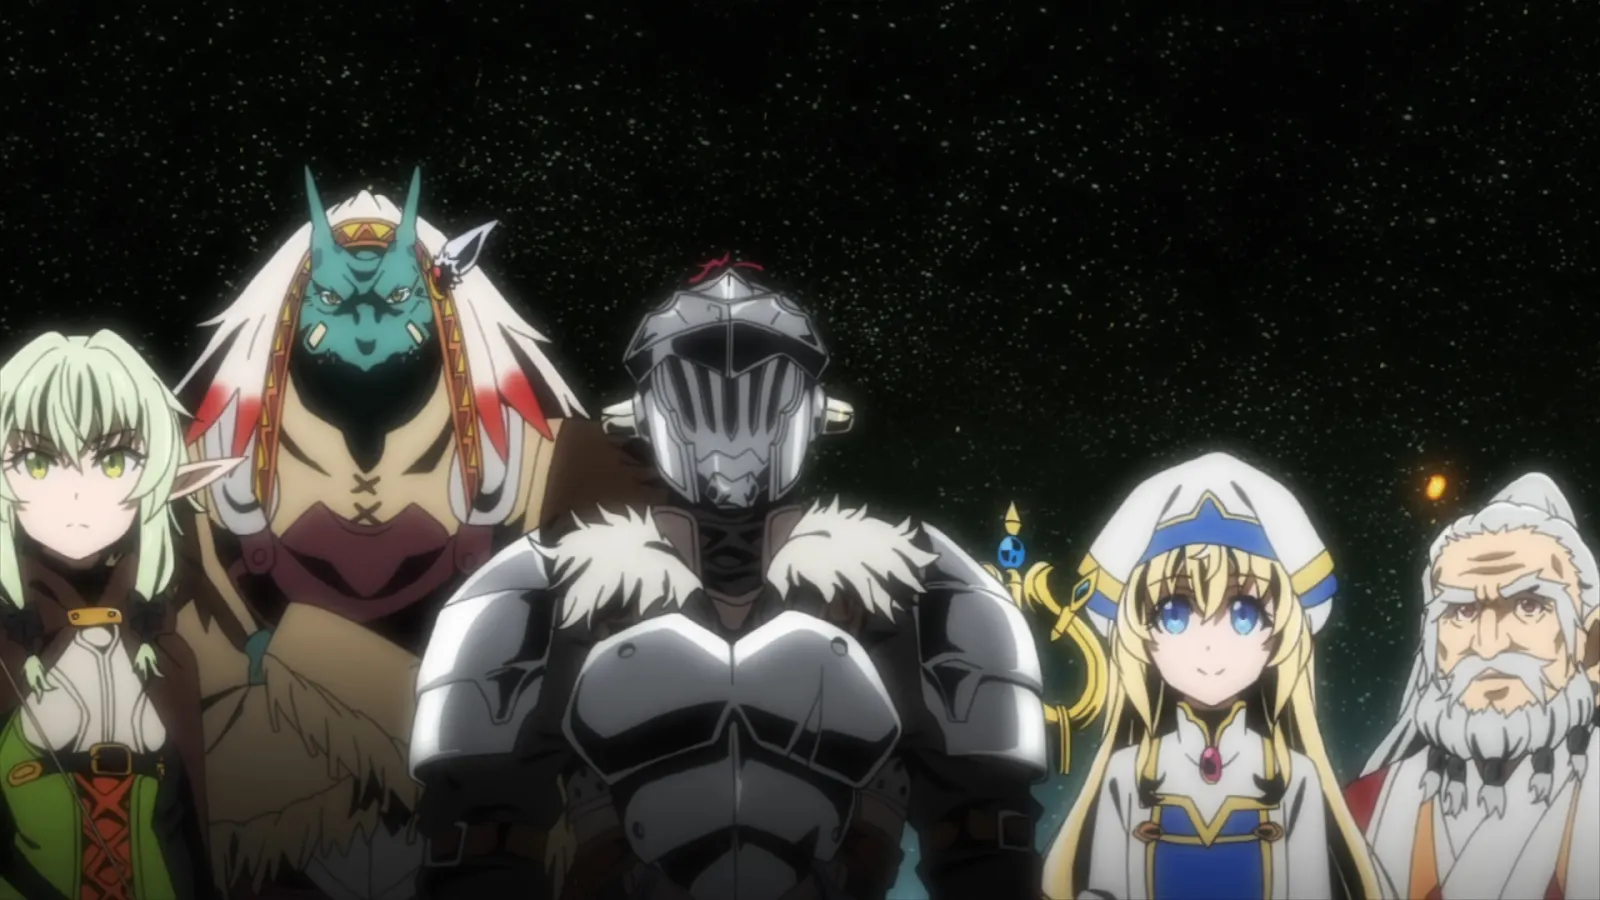 Goblin Slayer and pals set off on another light-hearted and jaunty adventure. Perhaps they’ll meet some fairies or make friends with a jolly leprechaun.